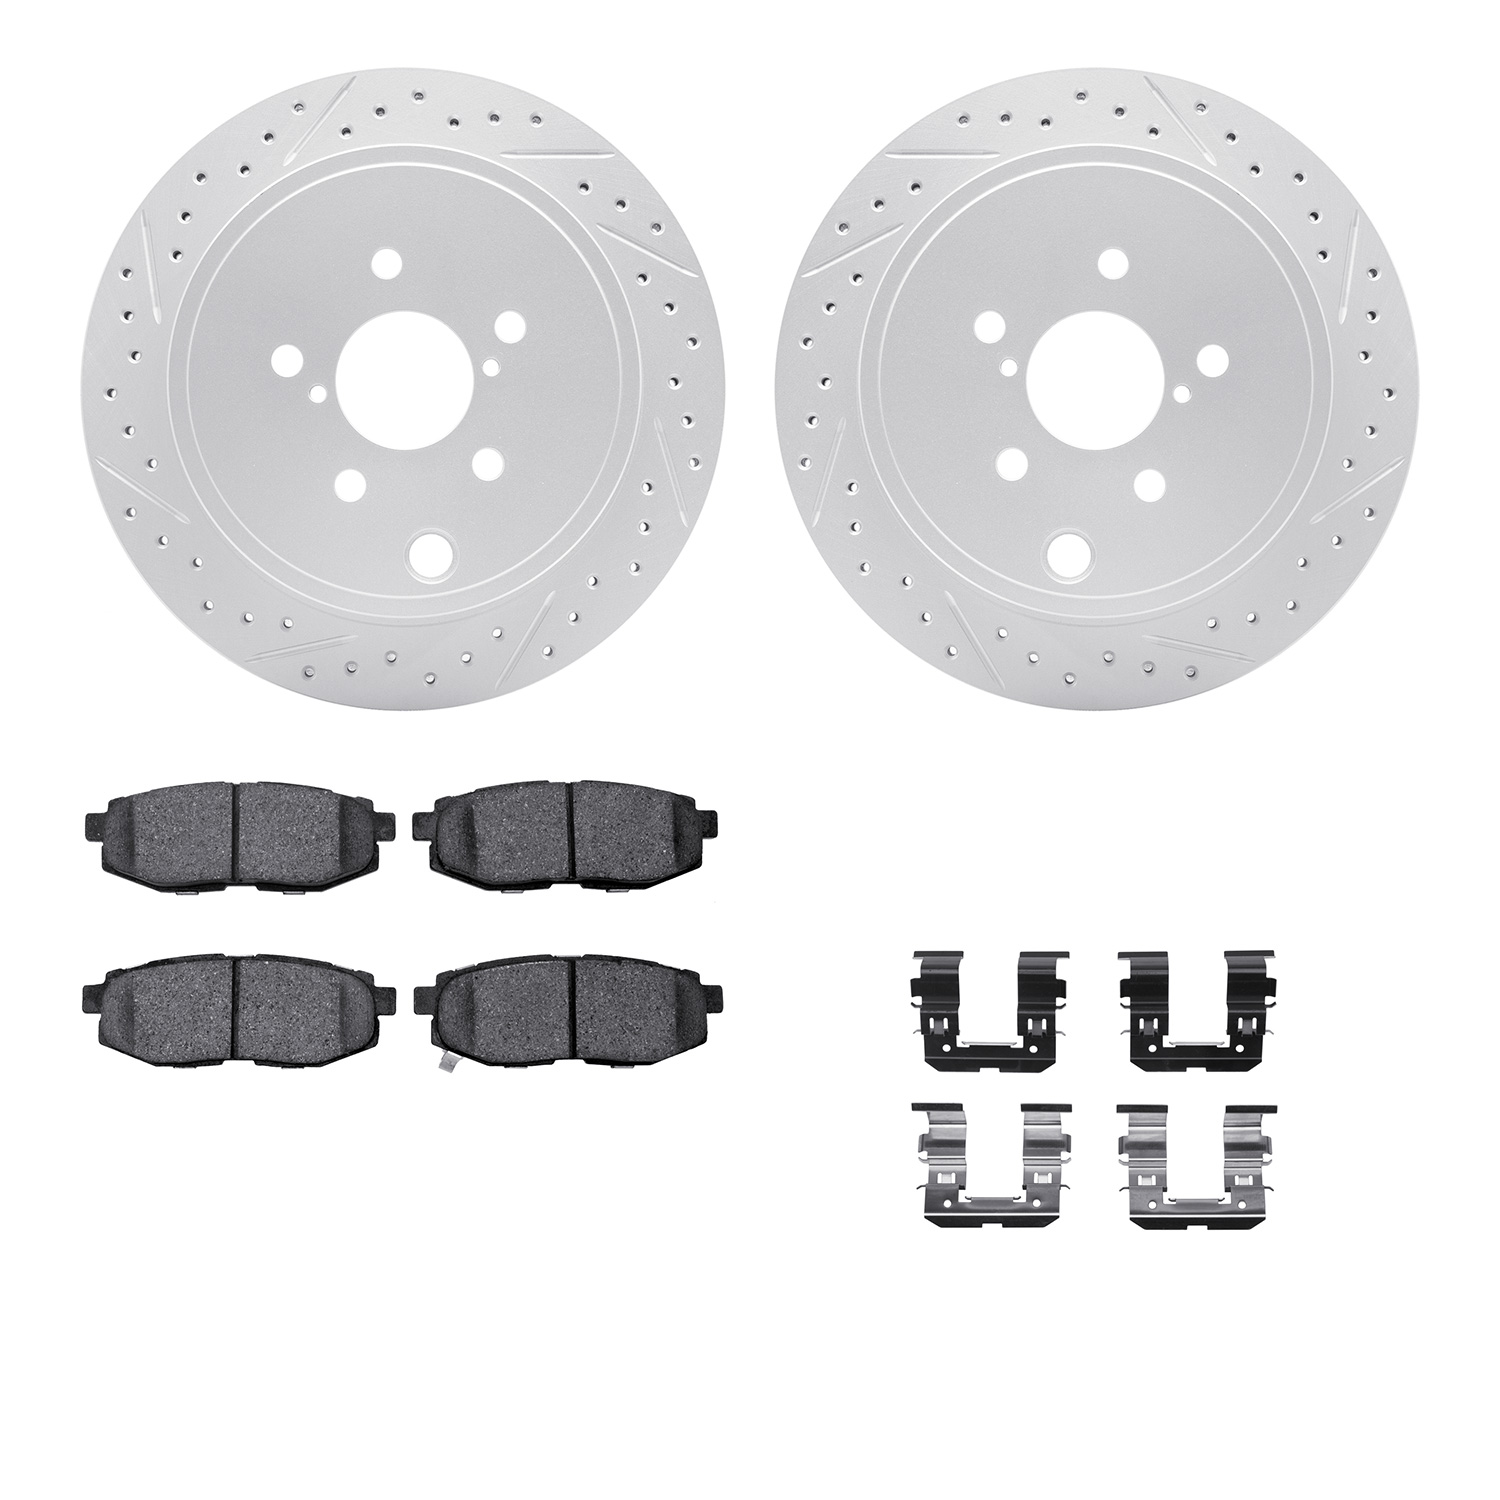 2512-13016 Geoperformance Drilled/Slotted Rotors w/5000 Advanced Brake Pads Kit & Hardware, Fits Select Multiple Makes/Models, P